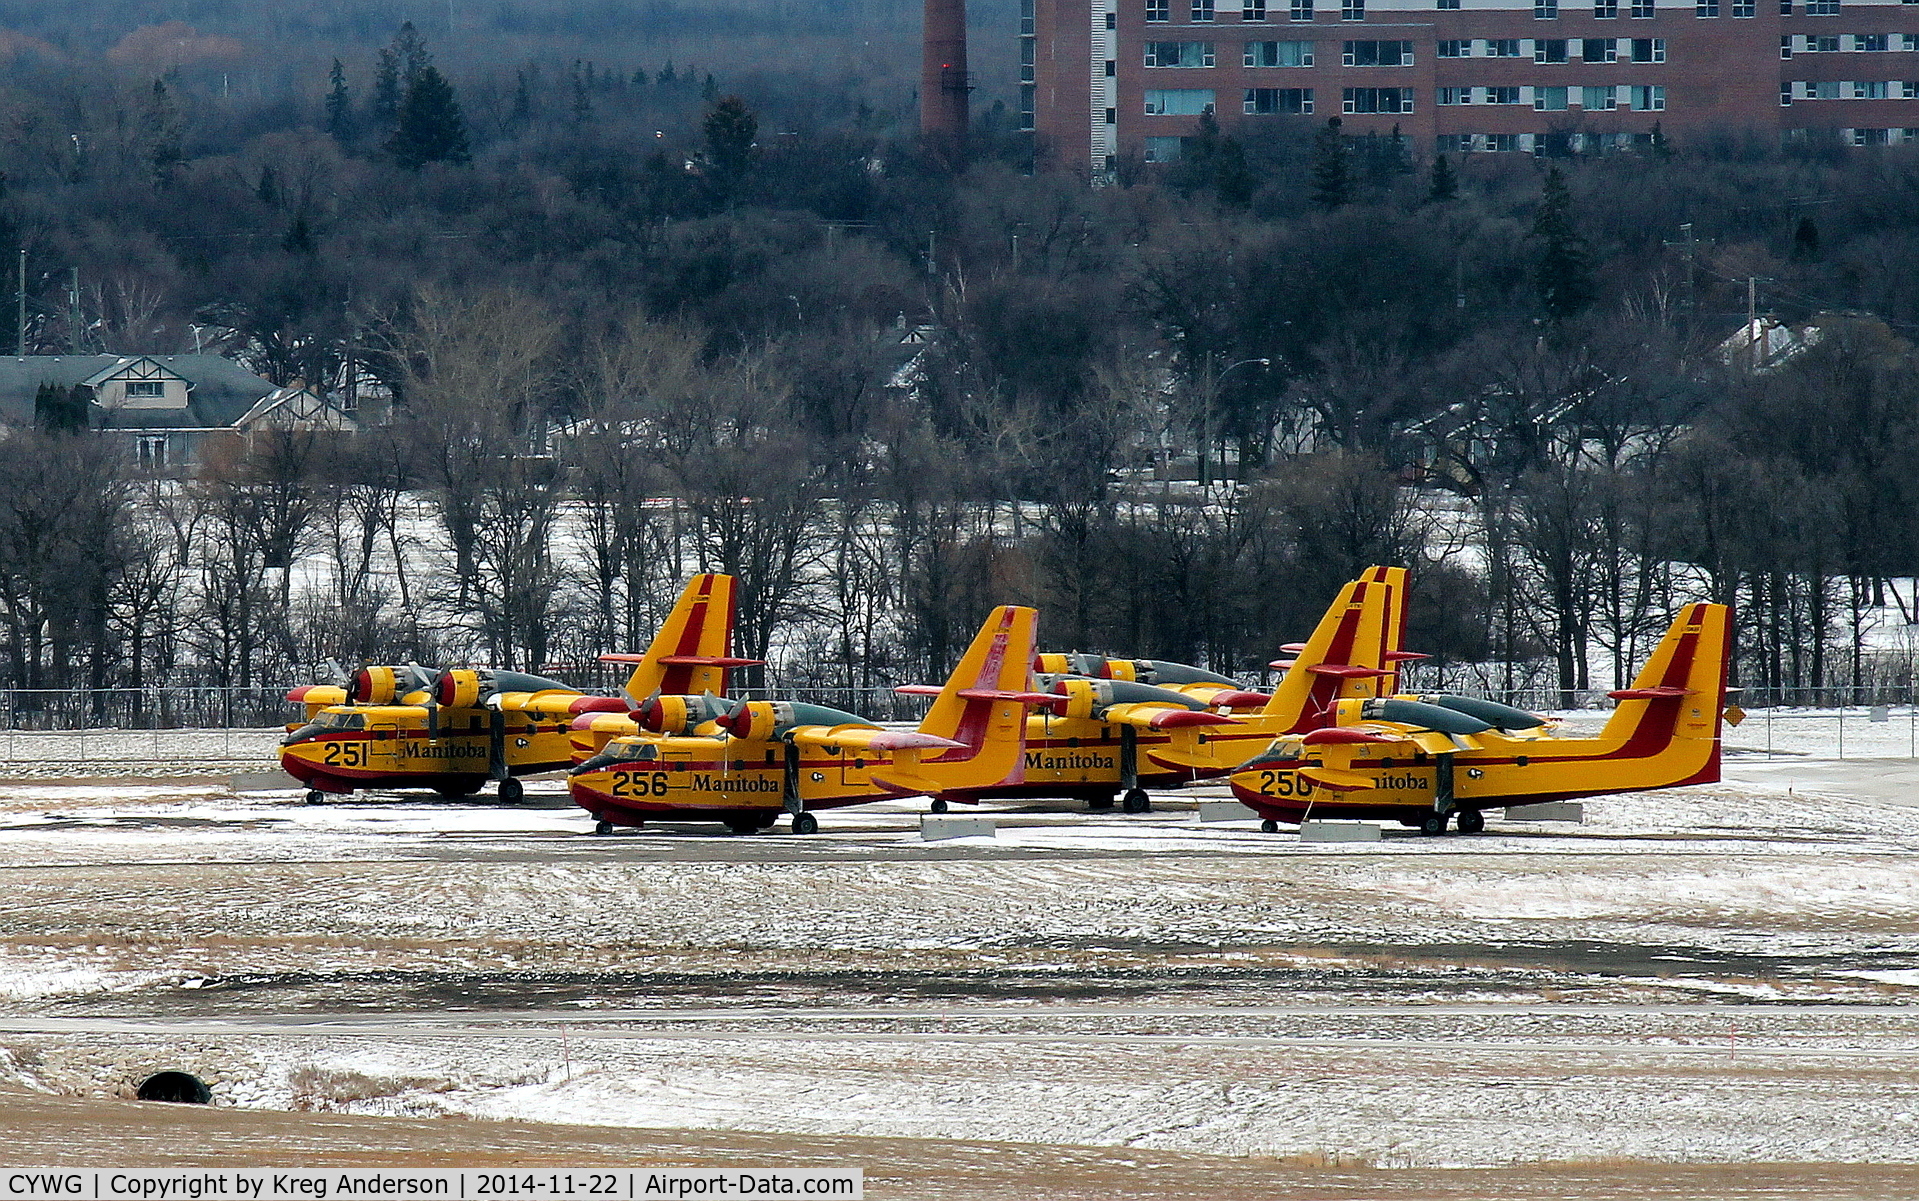 Winnipeg James Armstrong Richardson International Airport (Winnipeg International Airport), Winnipeg, Manitoba Canada (CYWG) - Several Canadair CL-415s owned by the Province of Manitoba parked for the winter.